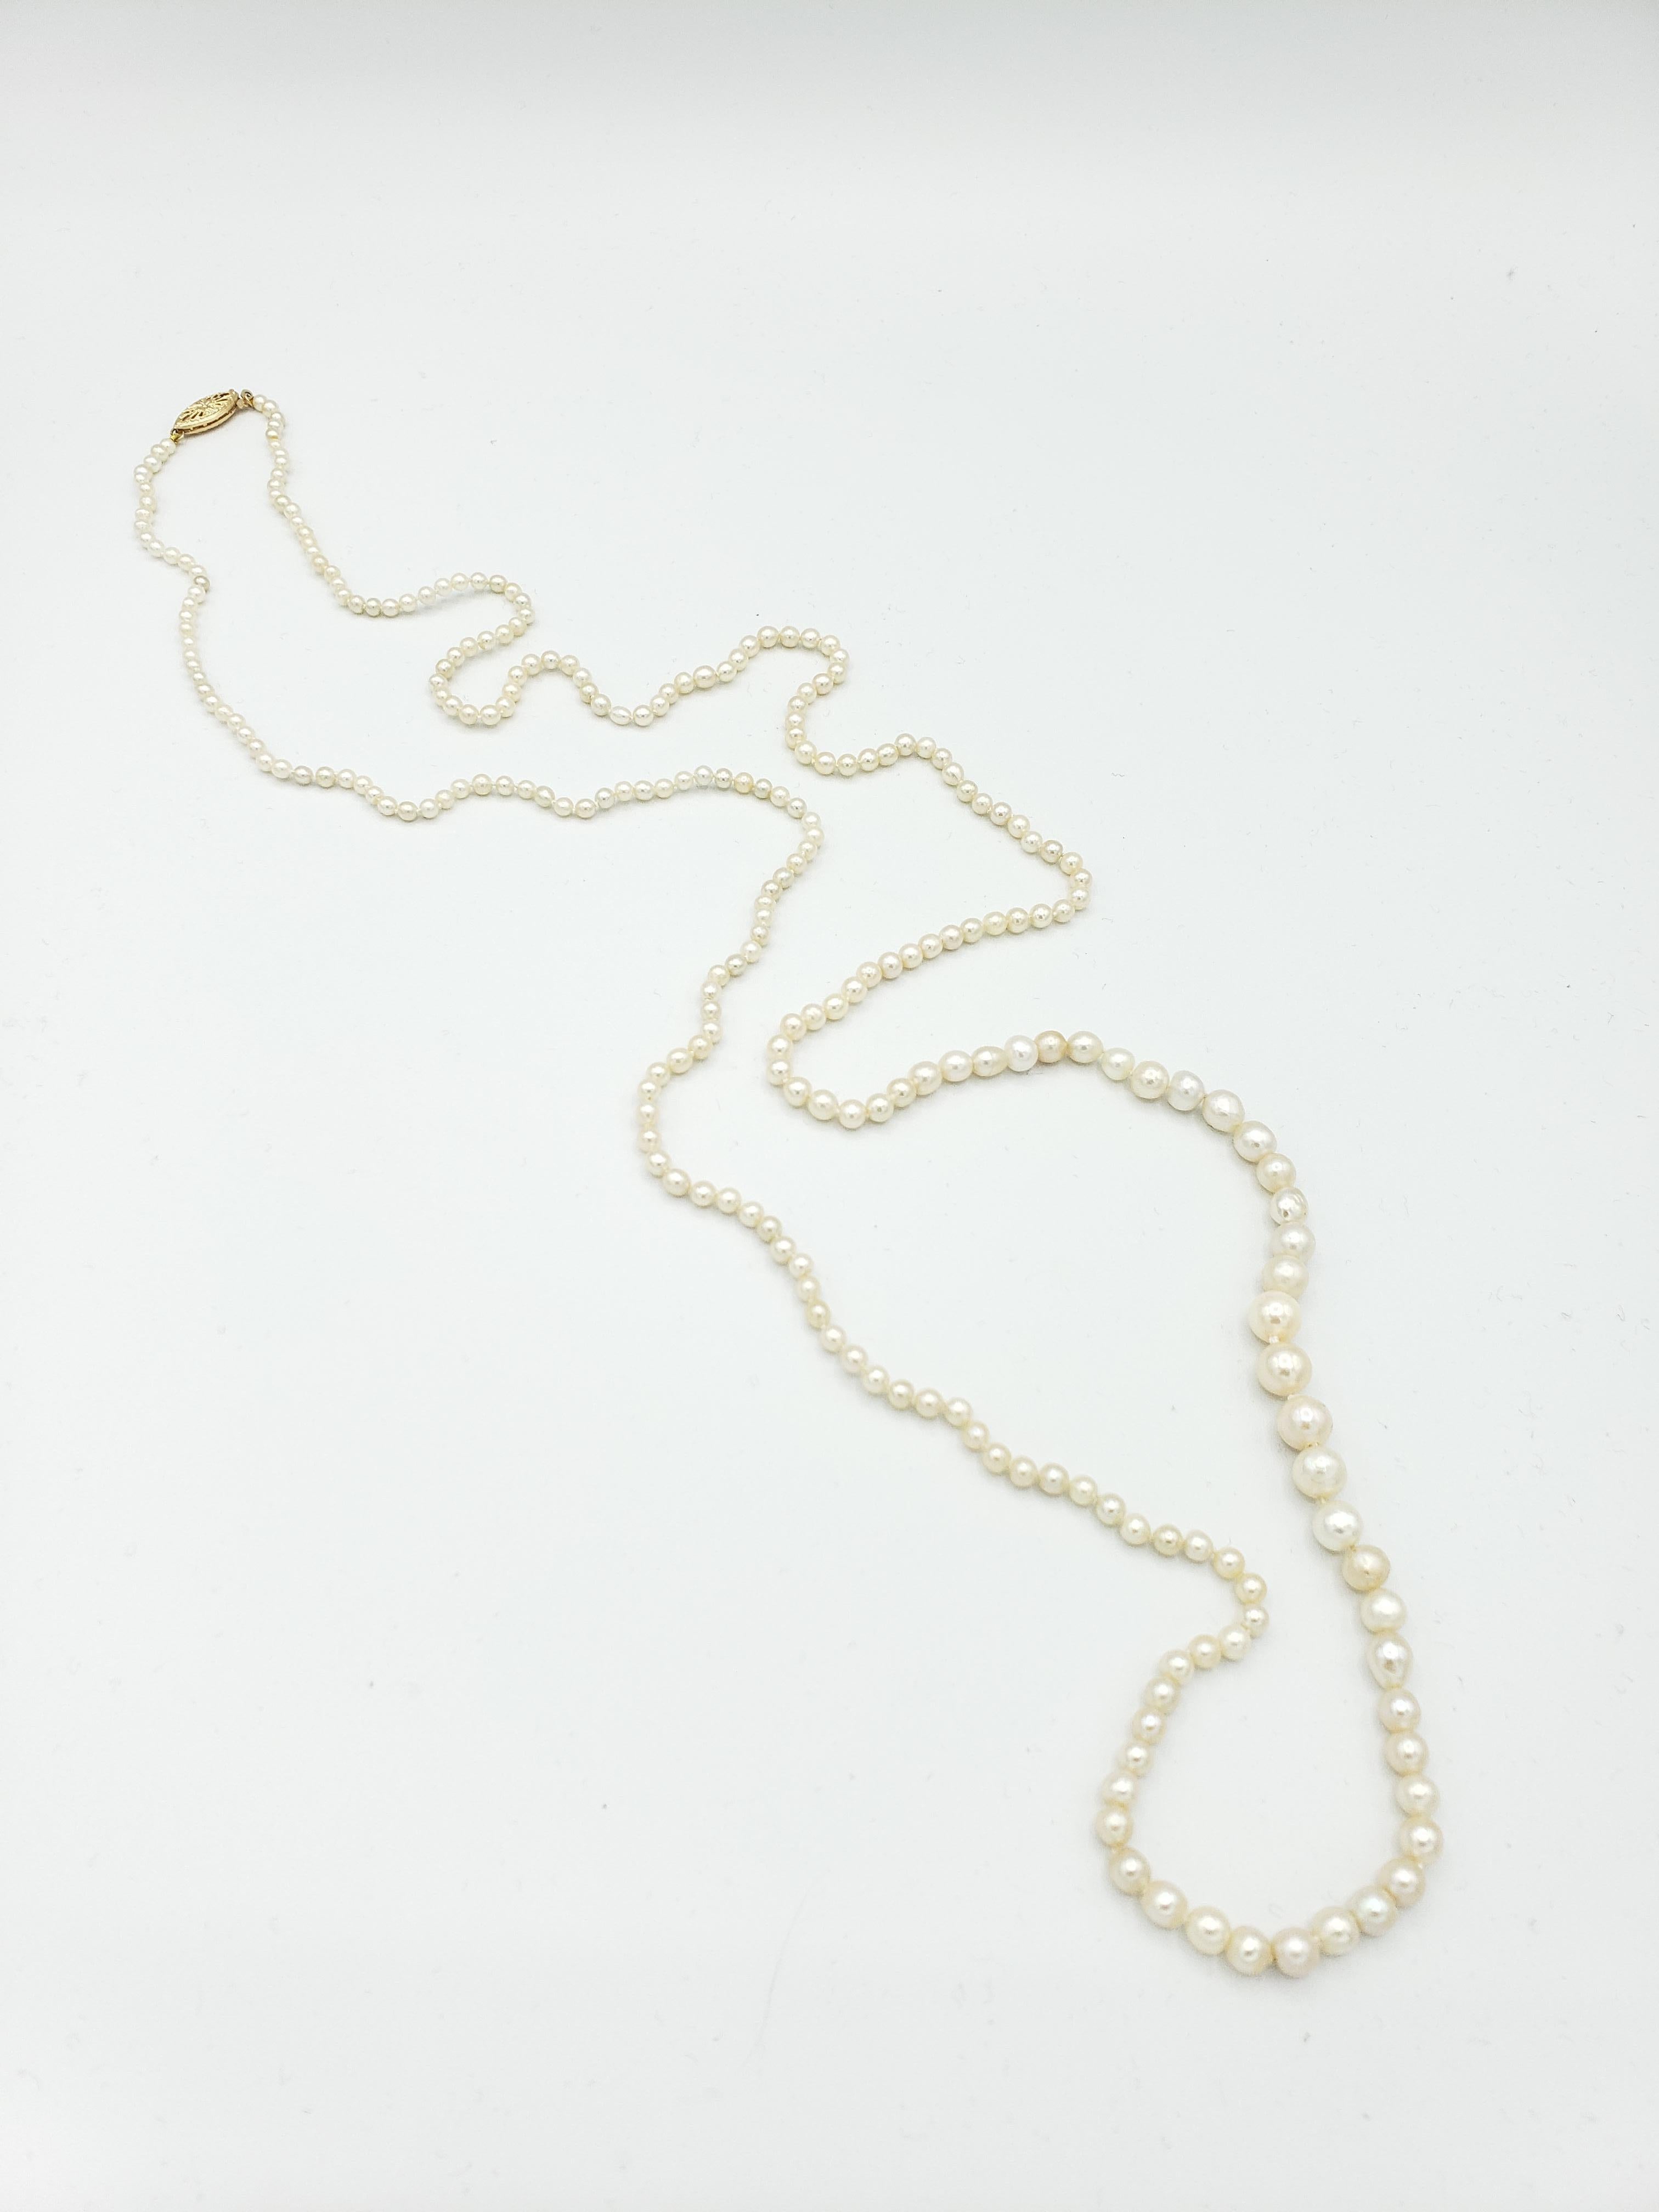 Early Victorian NEW GIA Cert Natural Saltwater Pearl Necklace 42 inches long. For Sale